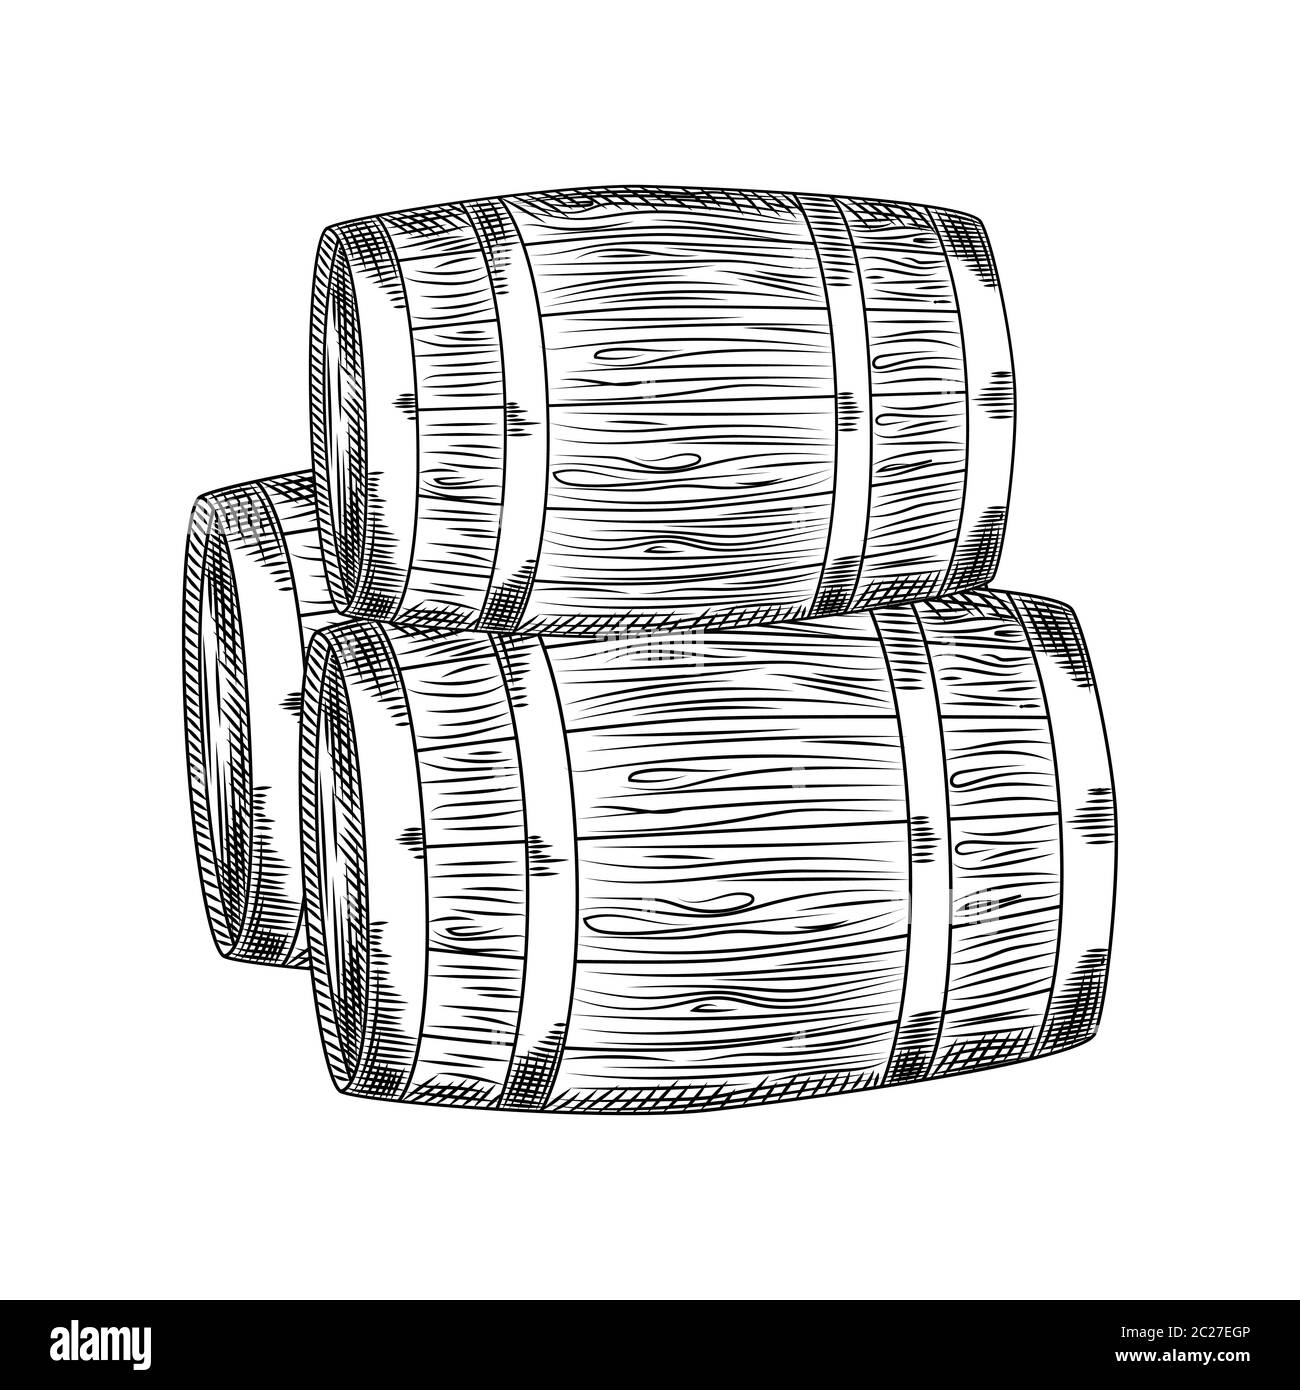 Wood barrel Black and White Stock Photos & Images - Alamy